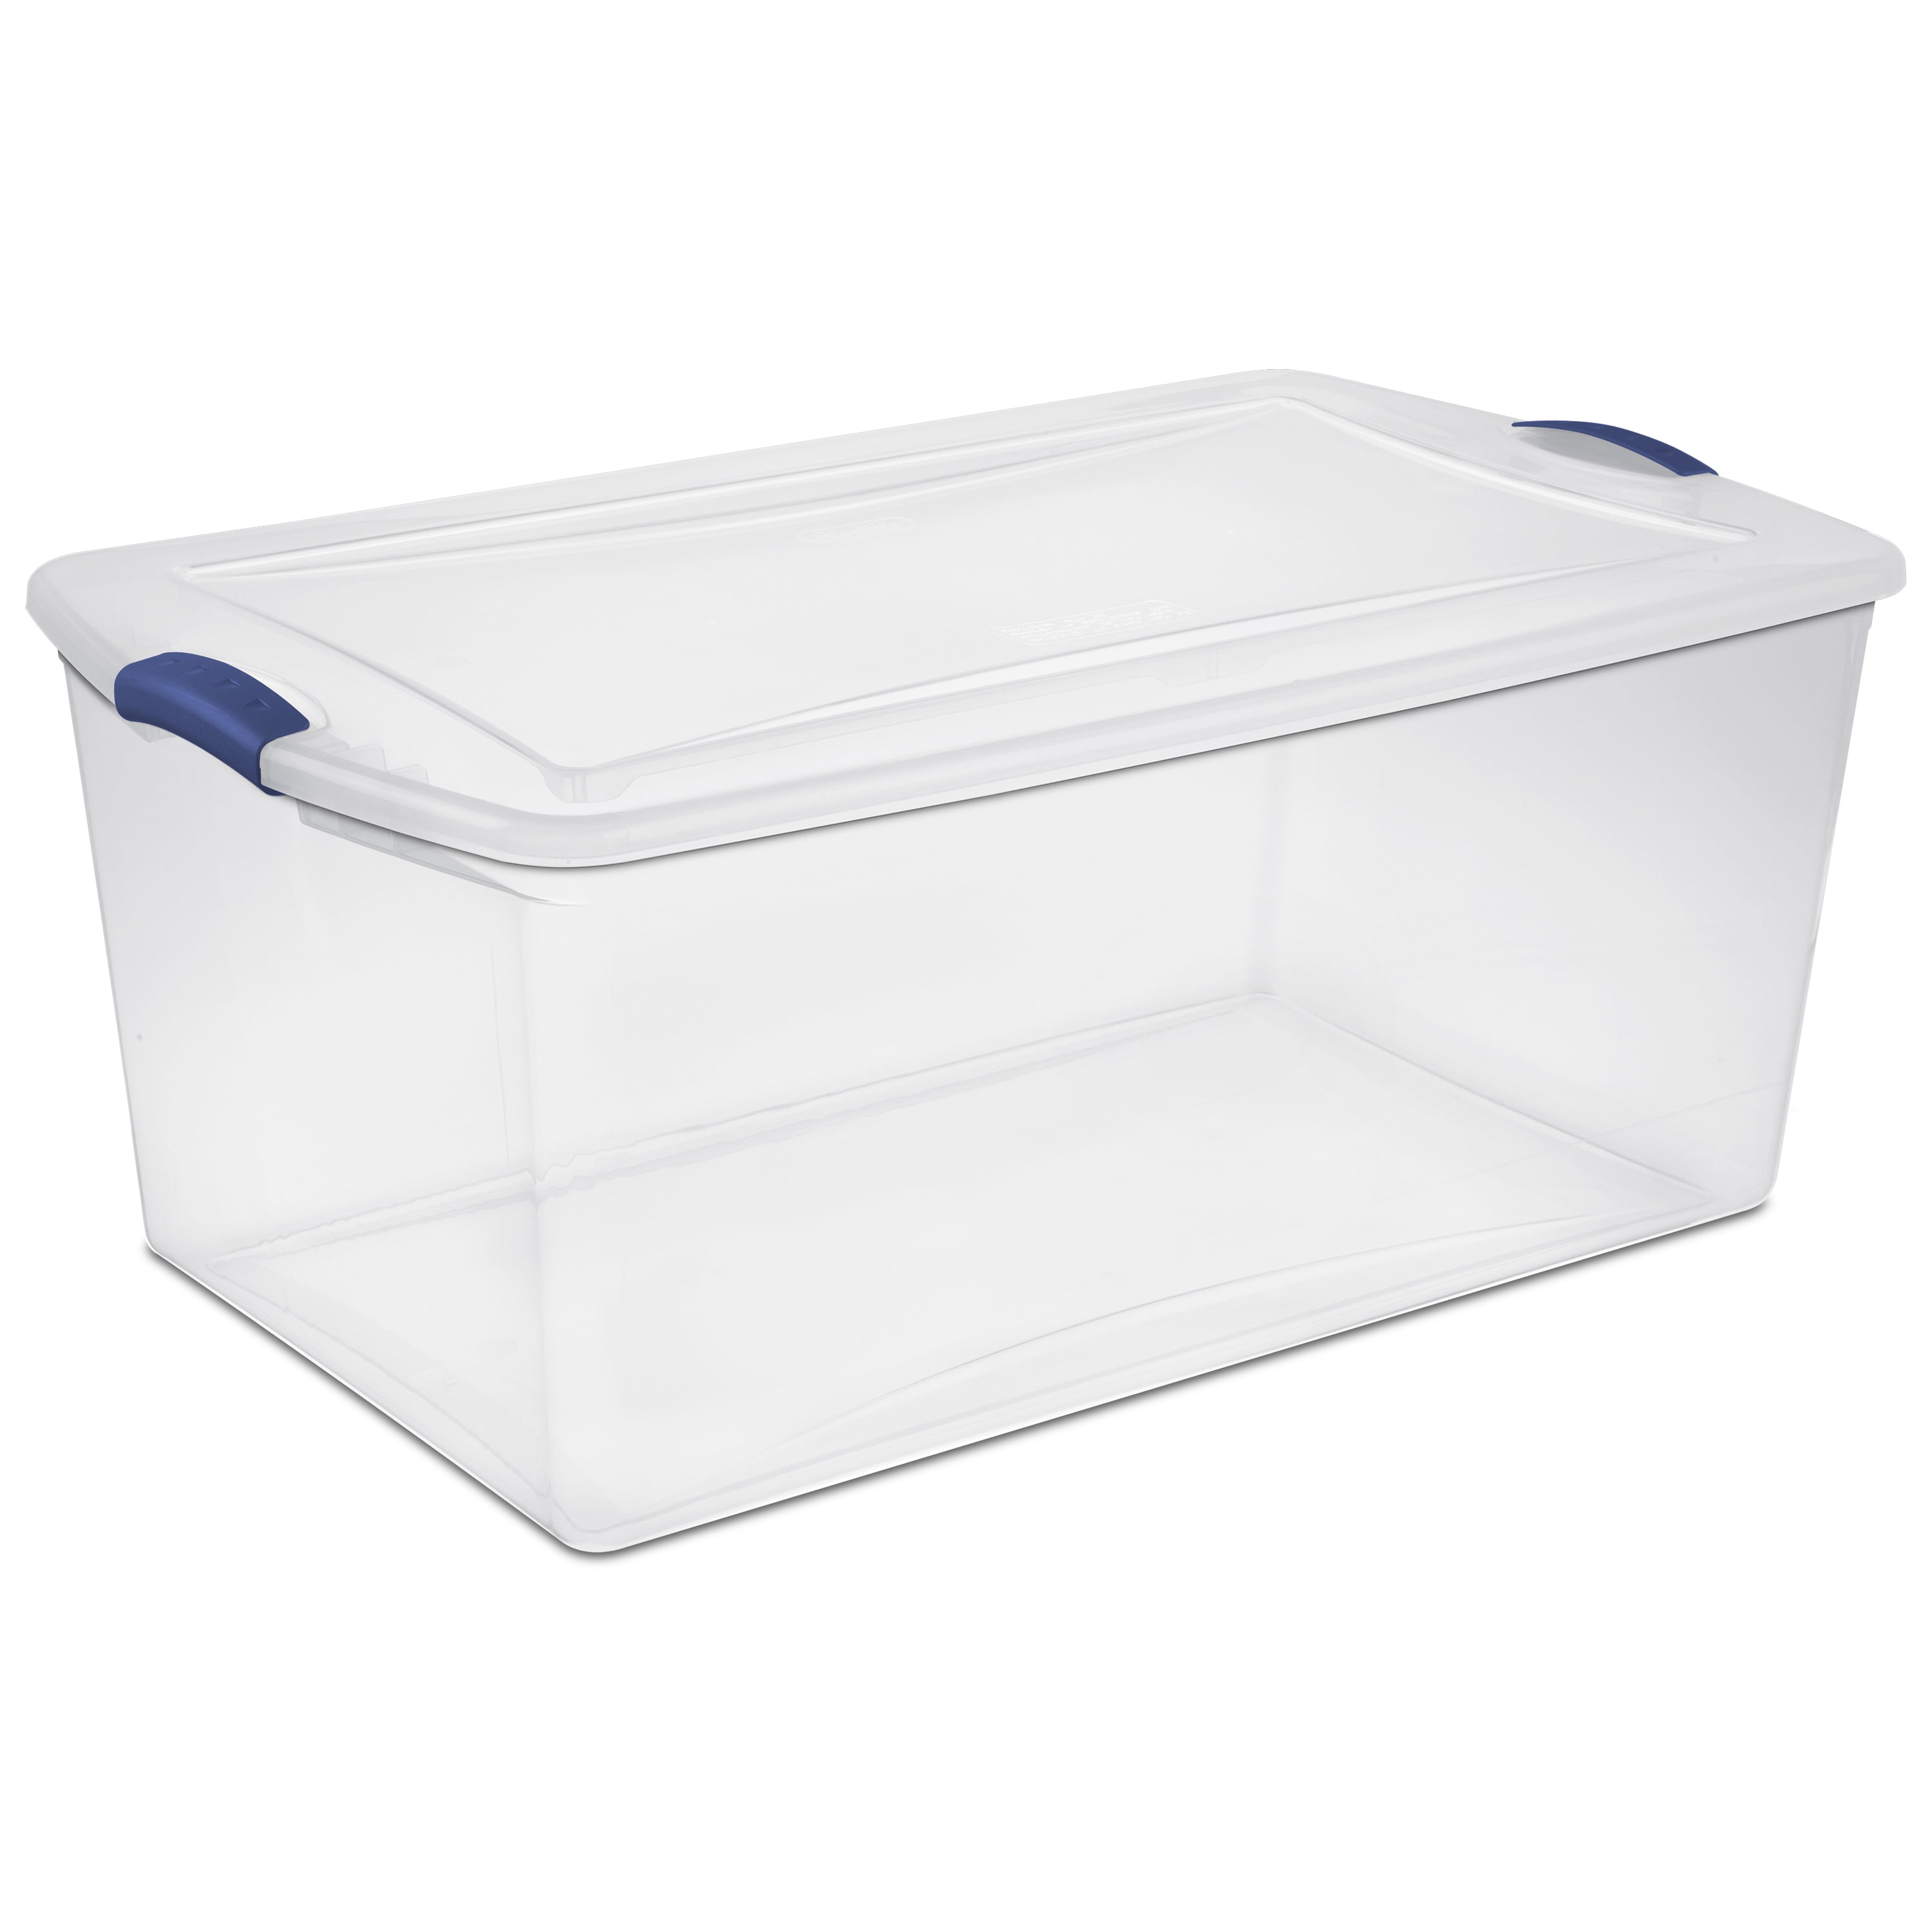 6 Packs Uumitty 6 Litre Small Clear First Aid Storage Box Bin Container With Transparent Grey Lid and Handles